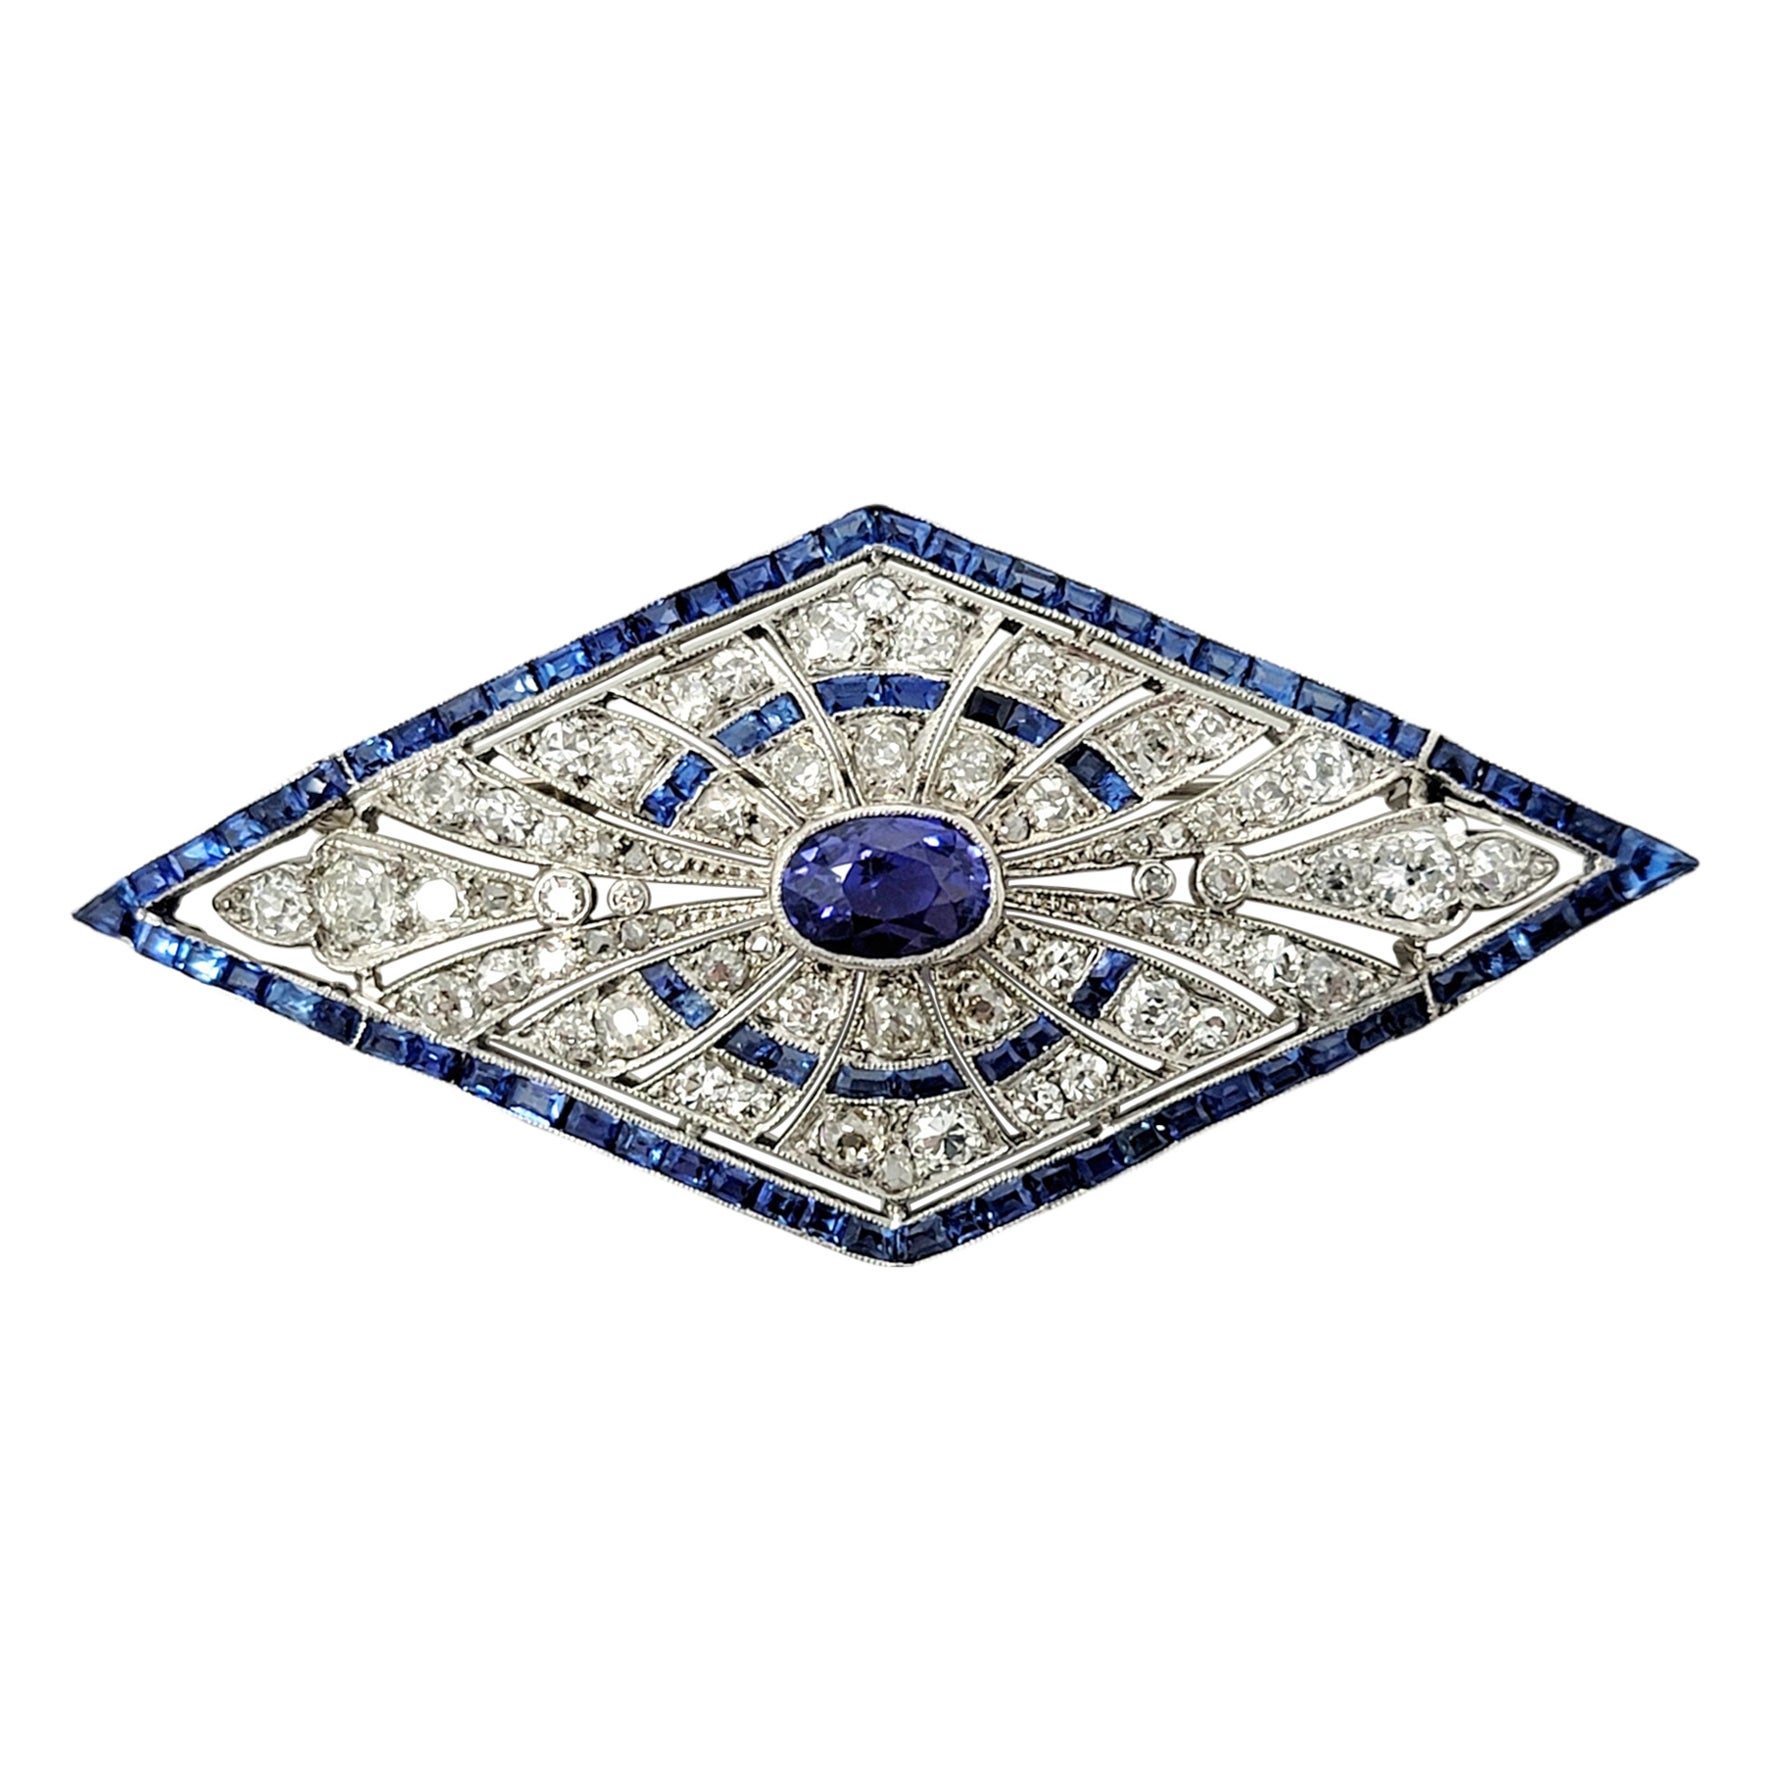 Vintage Oval Mixed Cut Sapphire and Diamond Brooch in Platinum 8.20 Carats Total For Sale